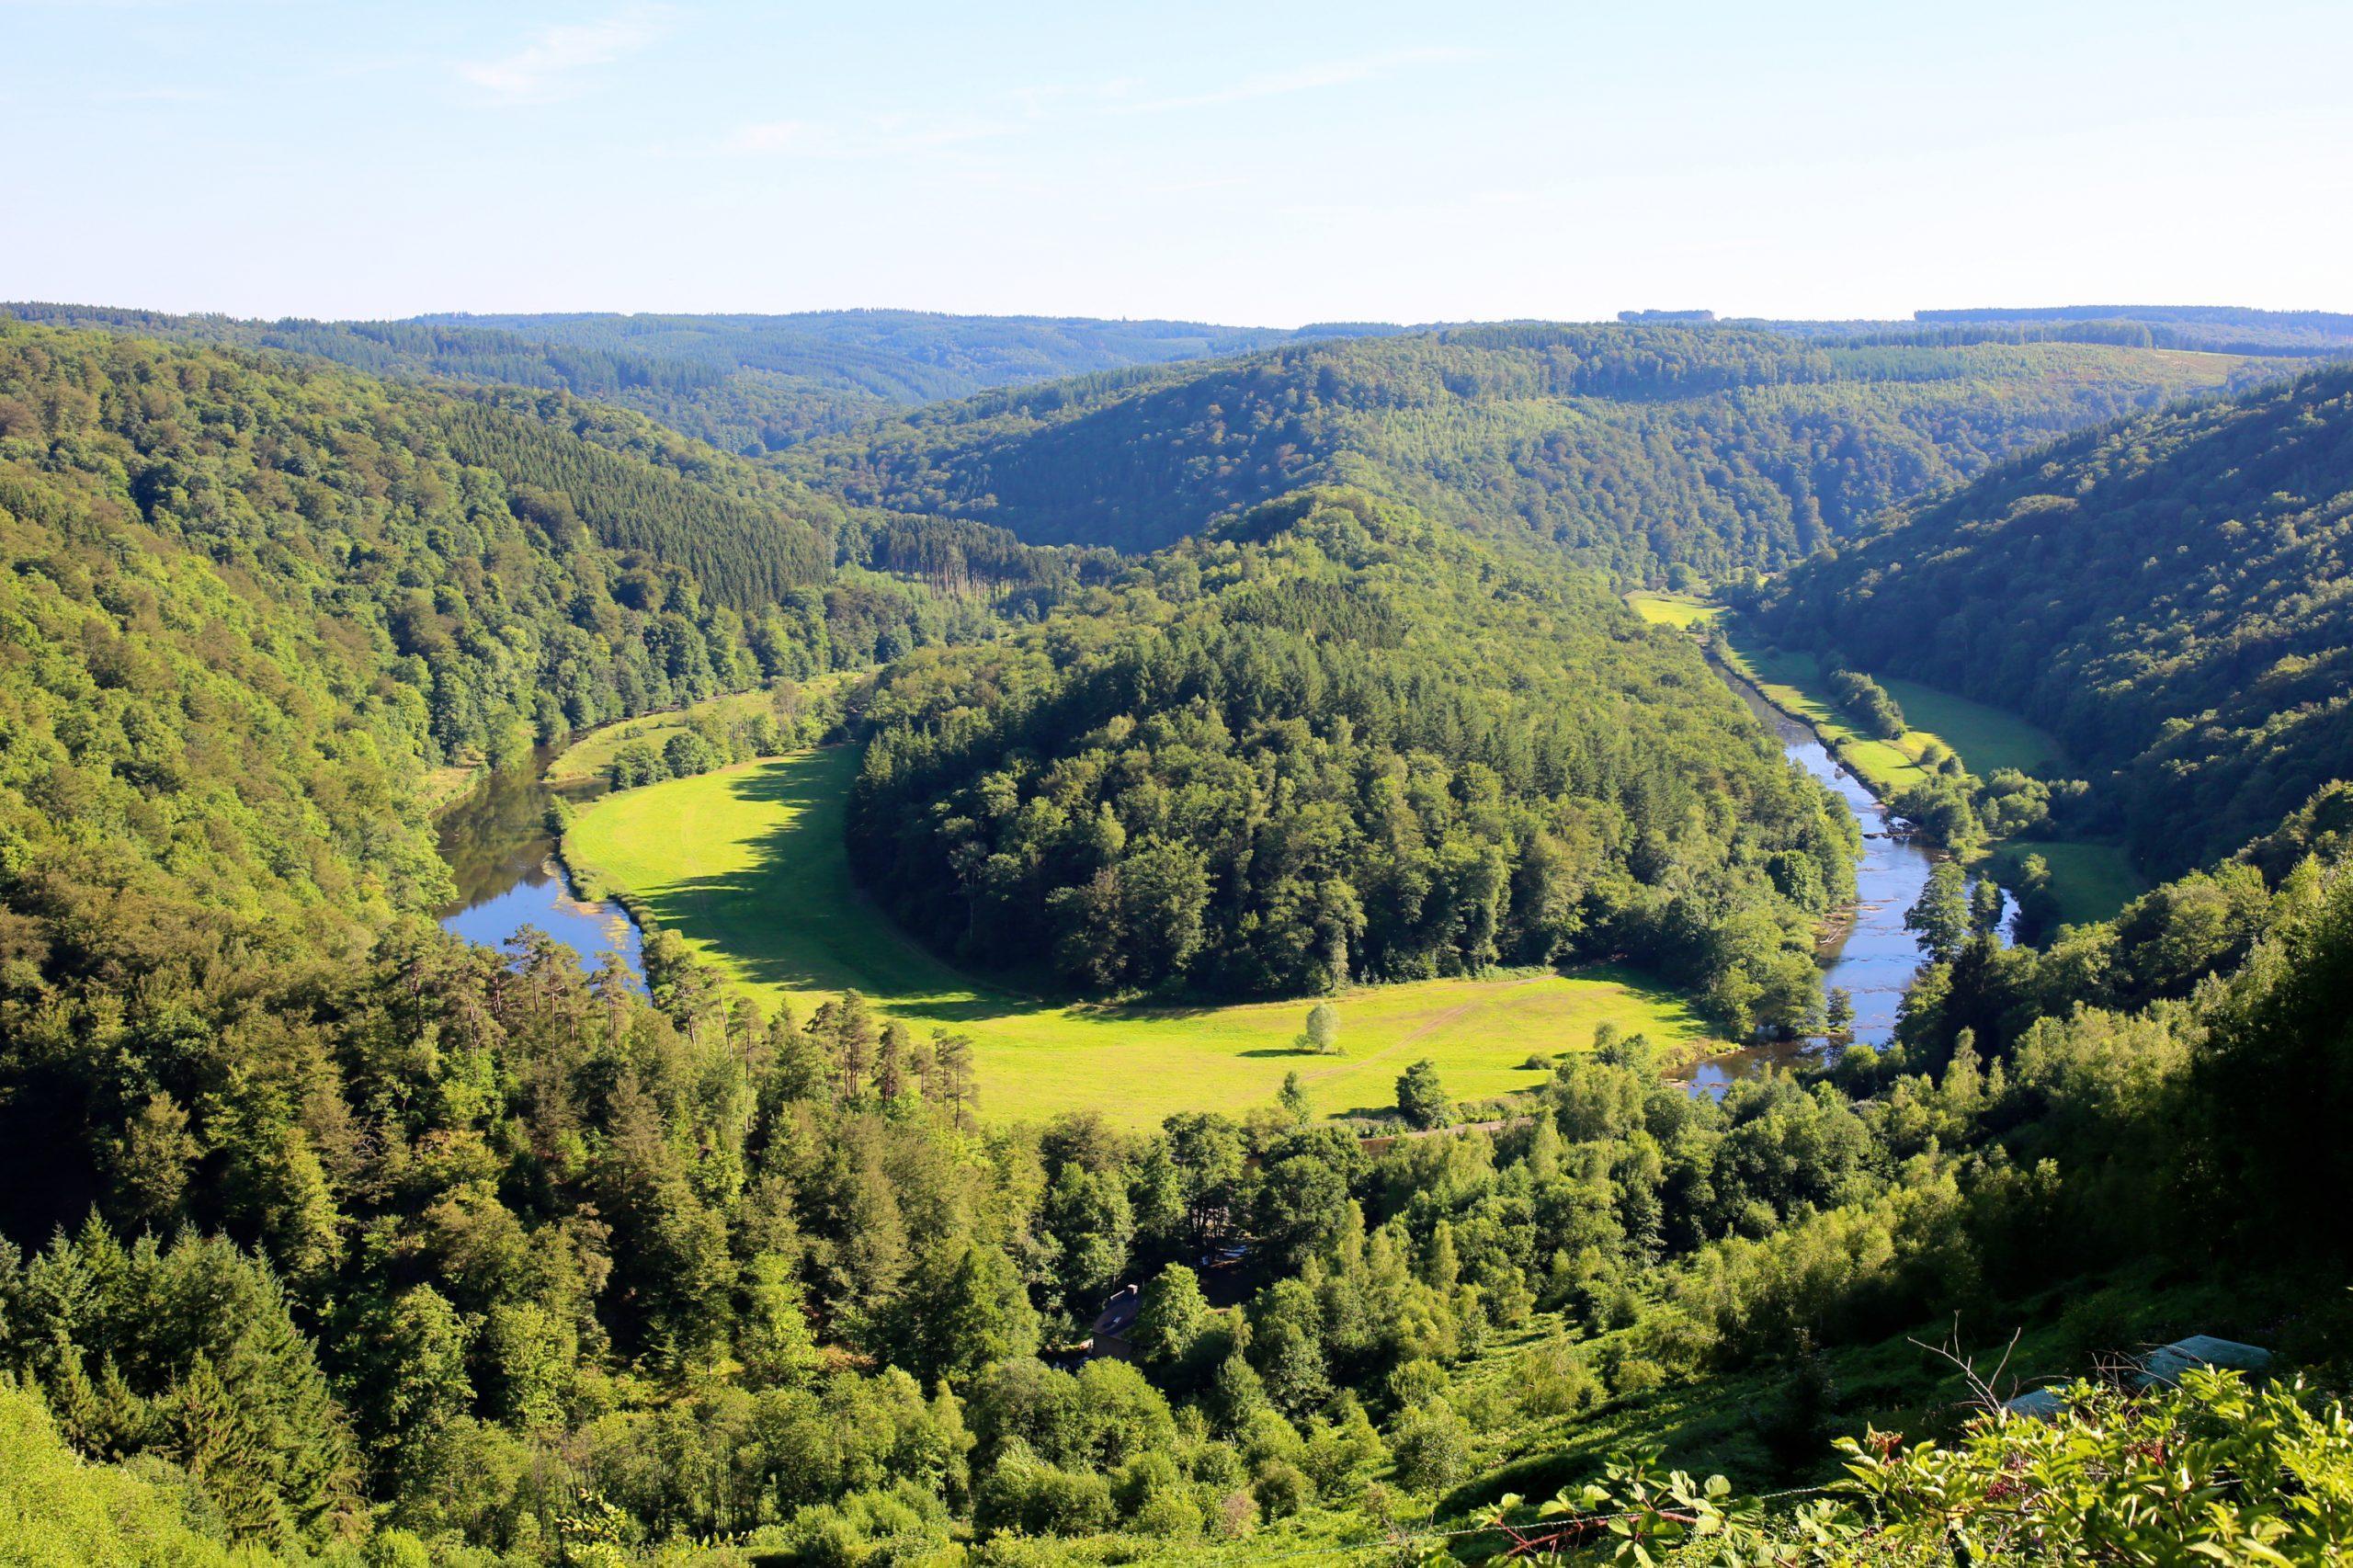 Elevated view from famous panoramic viewpoint of beautiful Tombeau du Géant (The Giant's tomb) lying inside the bend of the river Semois. It is located nearby the city of Bouillon, Wallonia, Ardennes, Belgium.